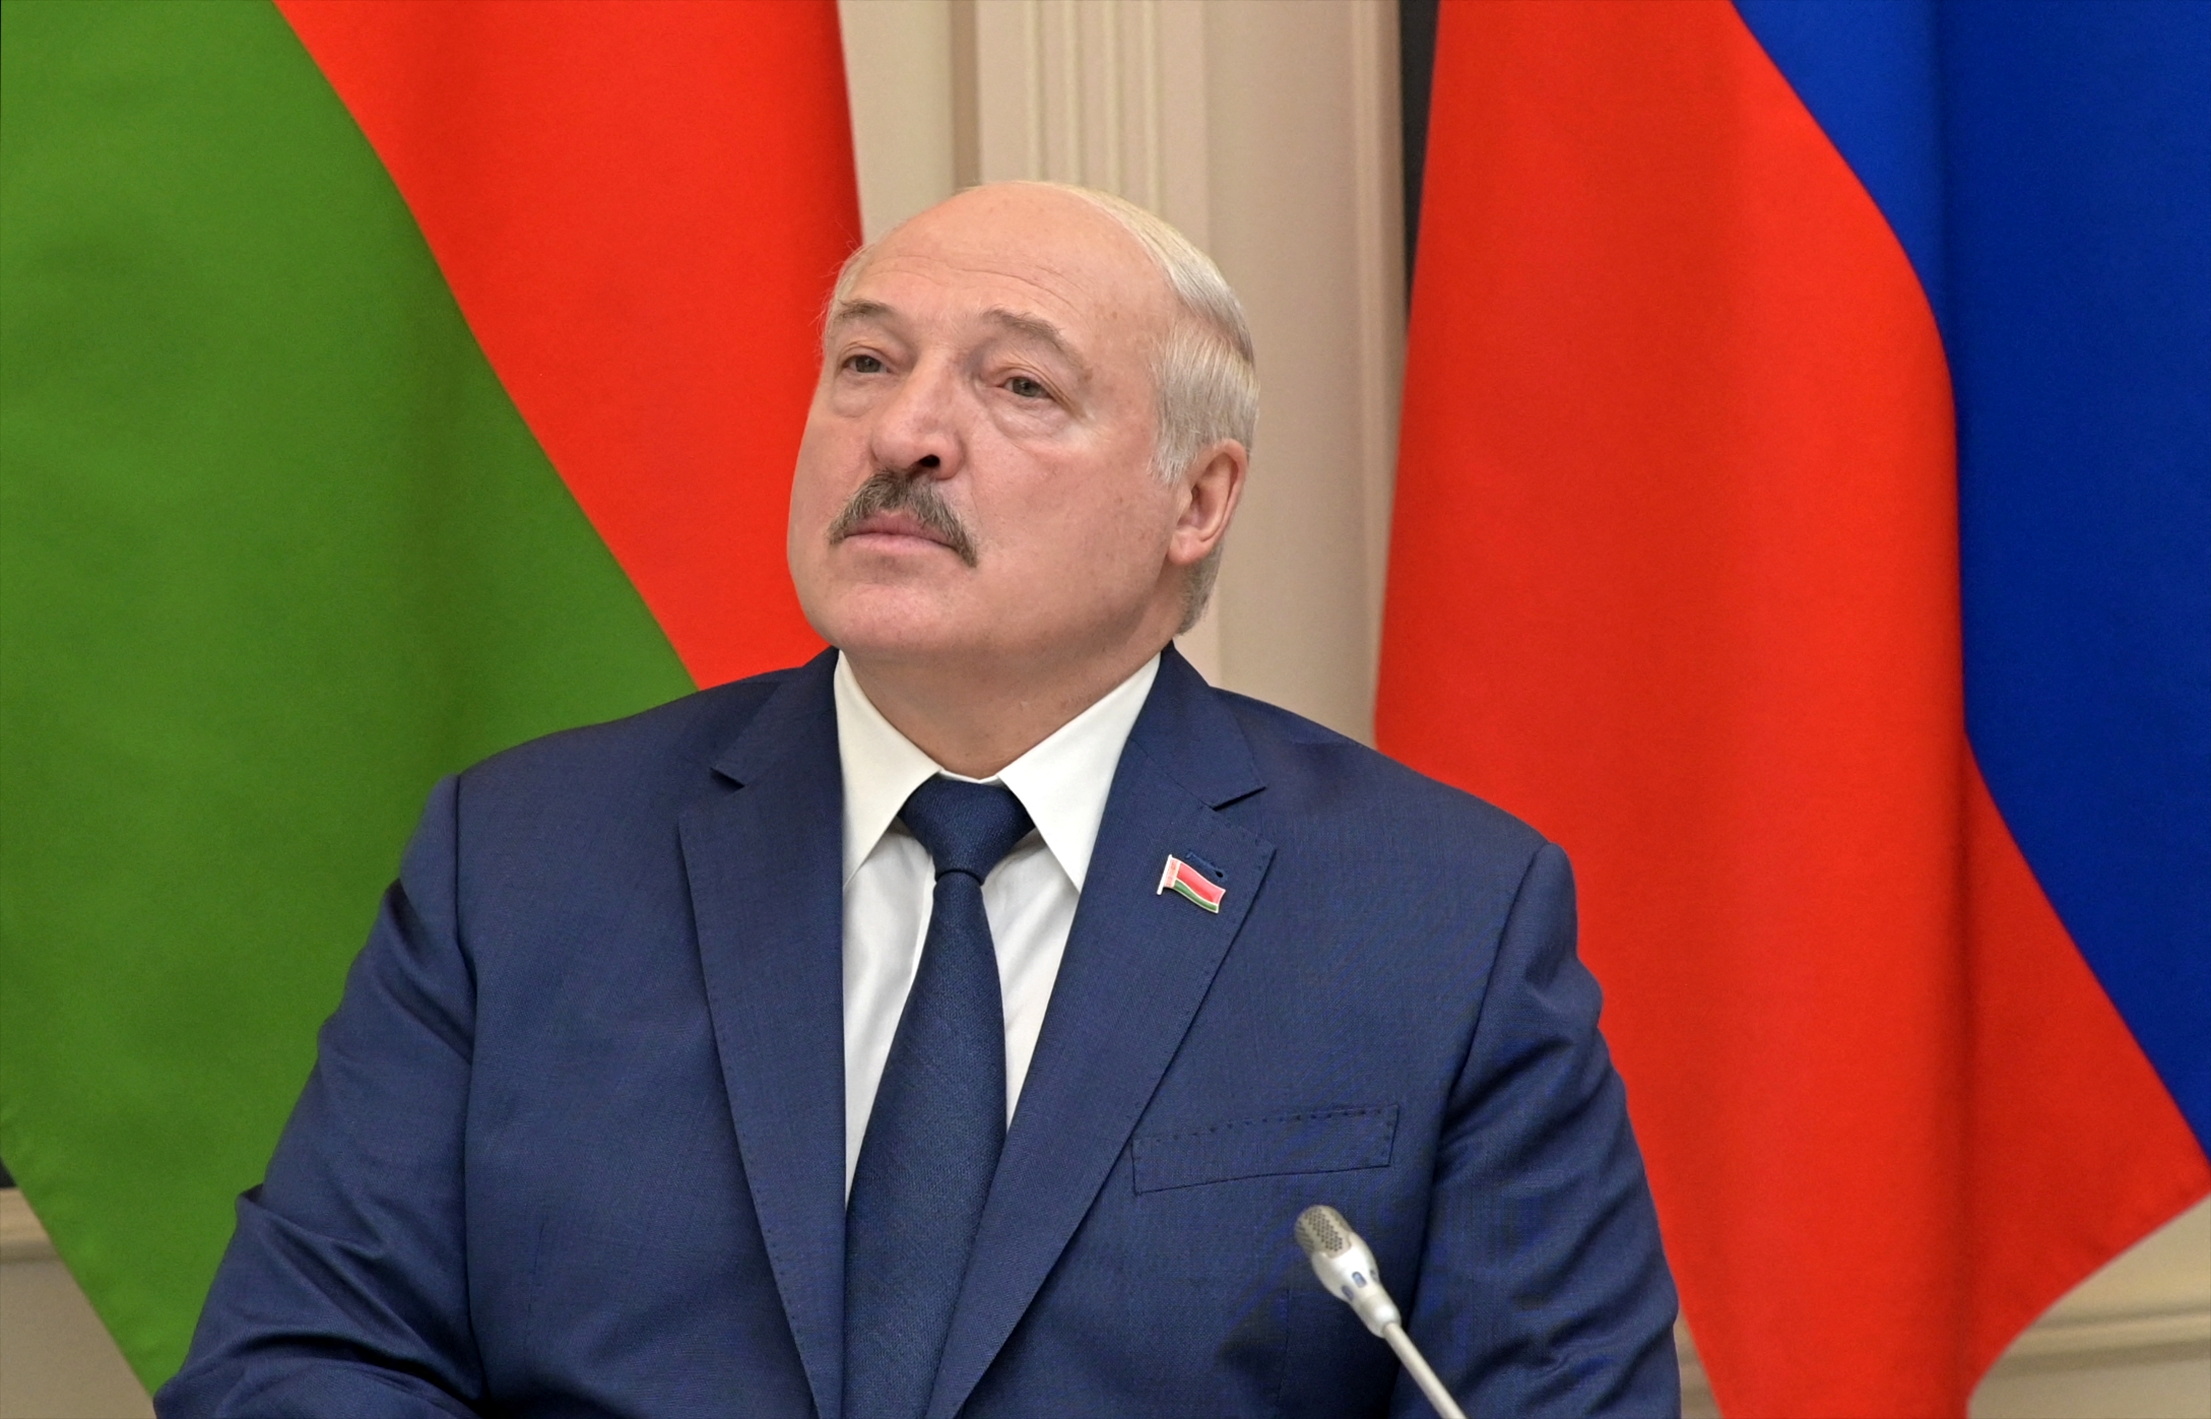 Lukashenko, who has been in power since 1994, has generated headlines over the past year for channeling state money to a series of oligarchs close to the Lukashenko family.